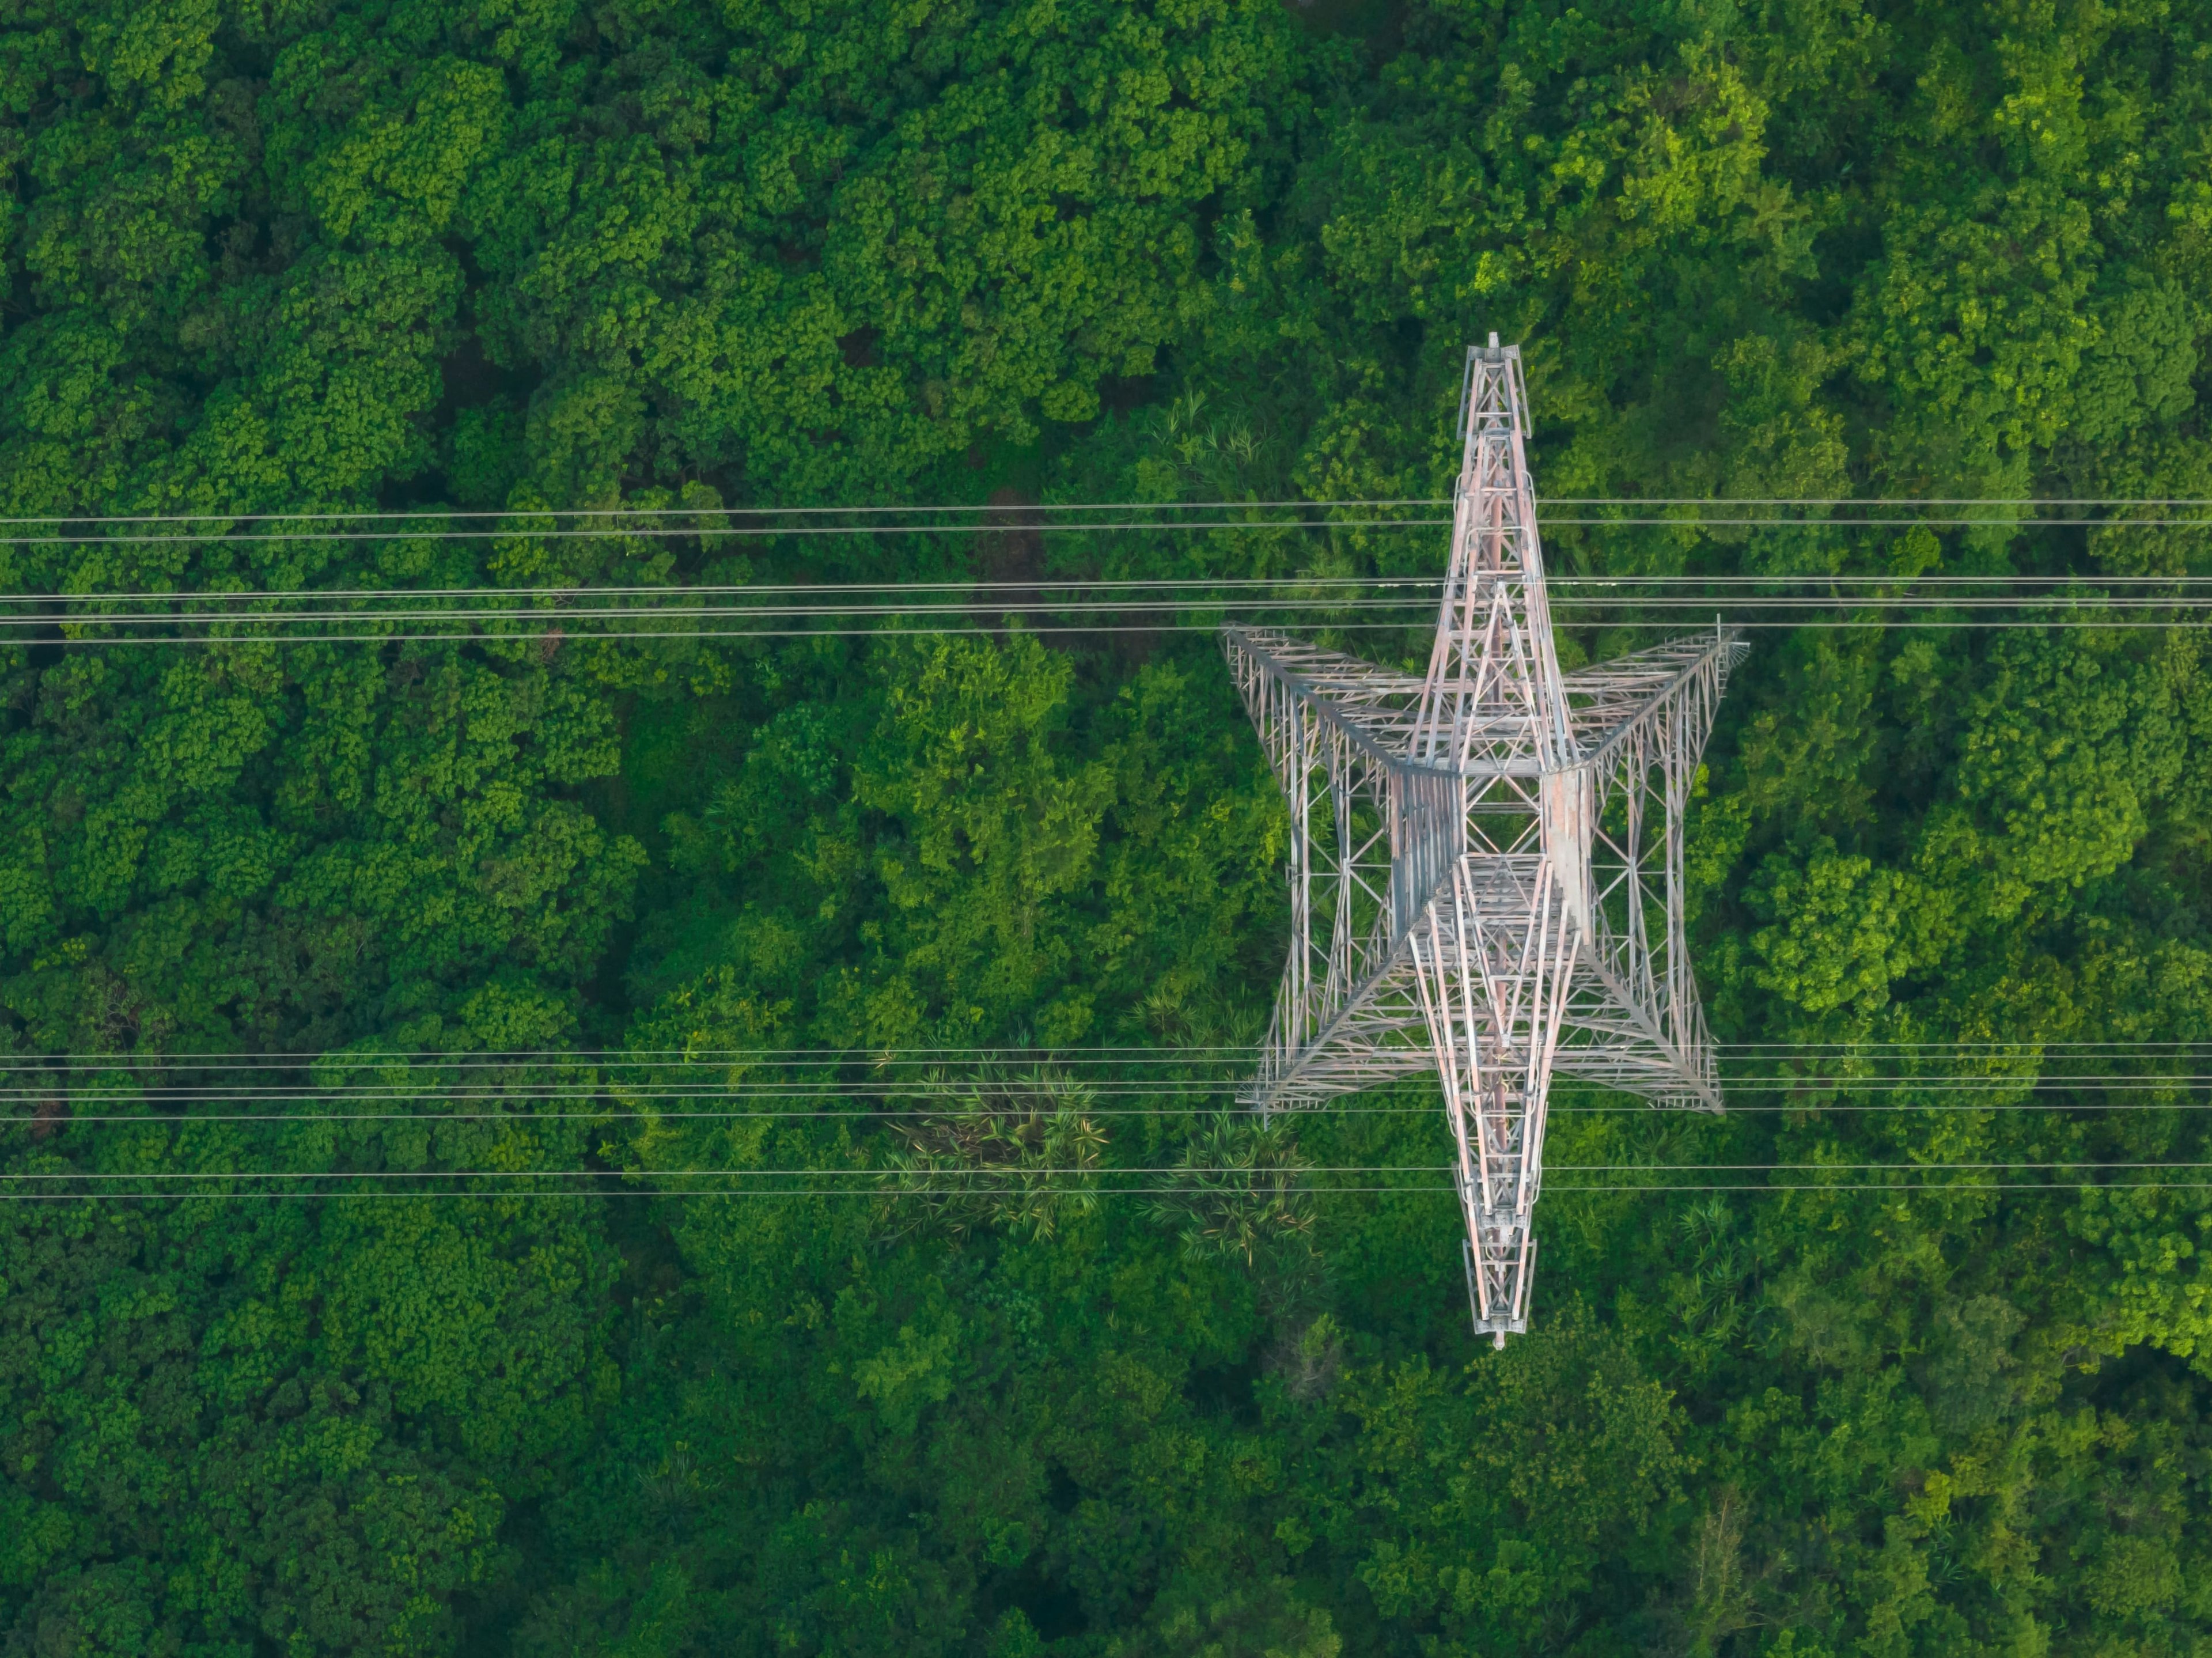 Image of a transmission tower